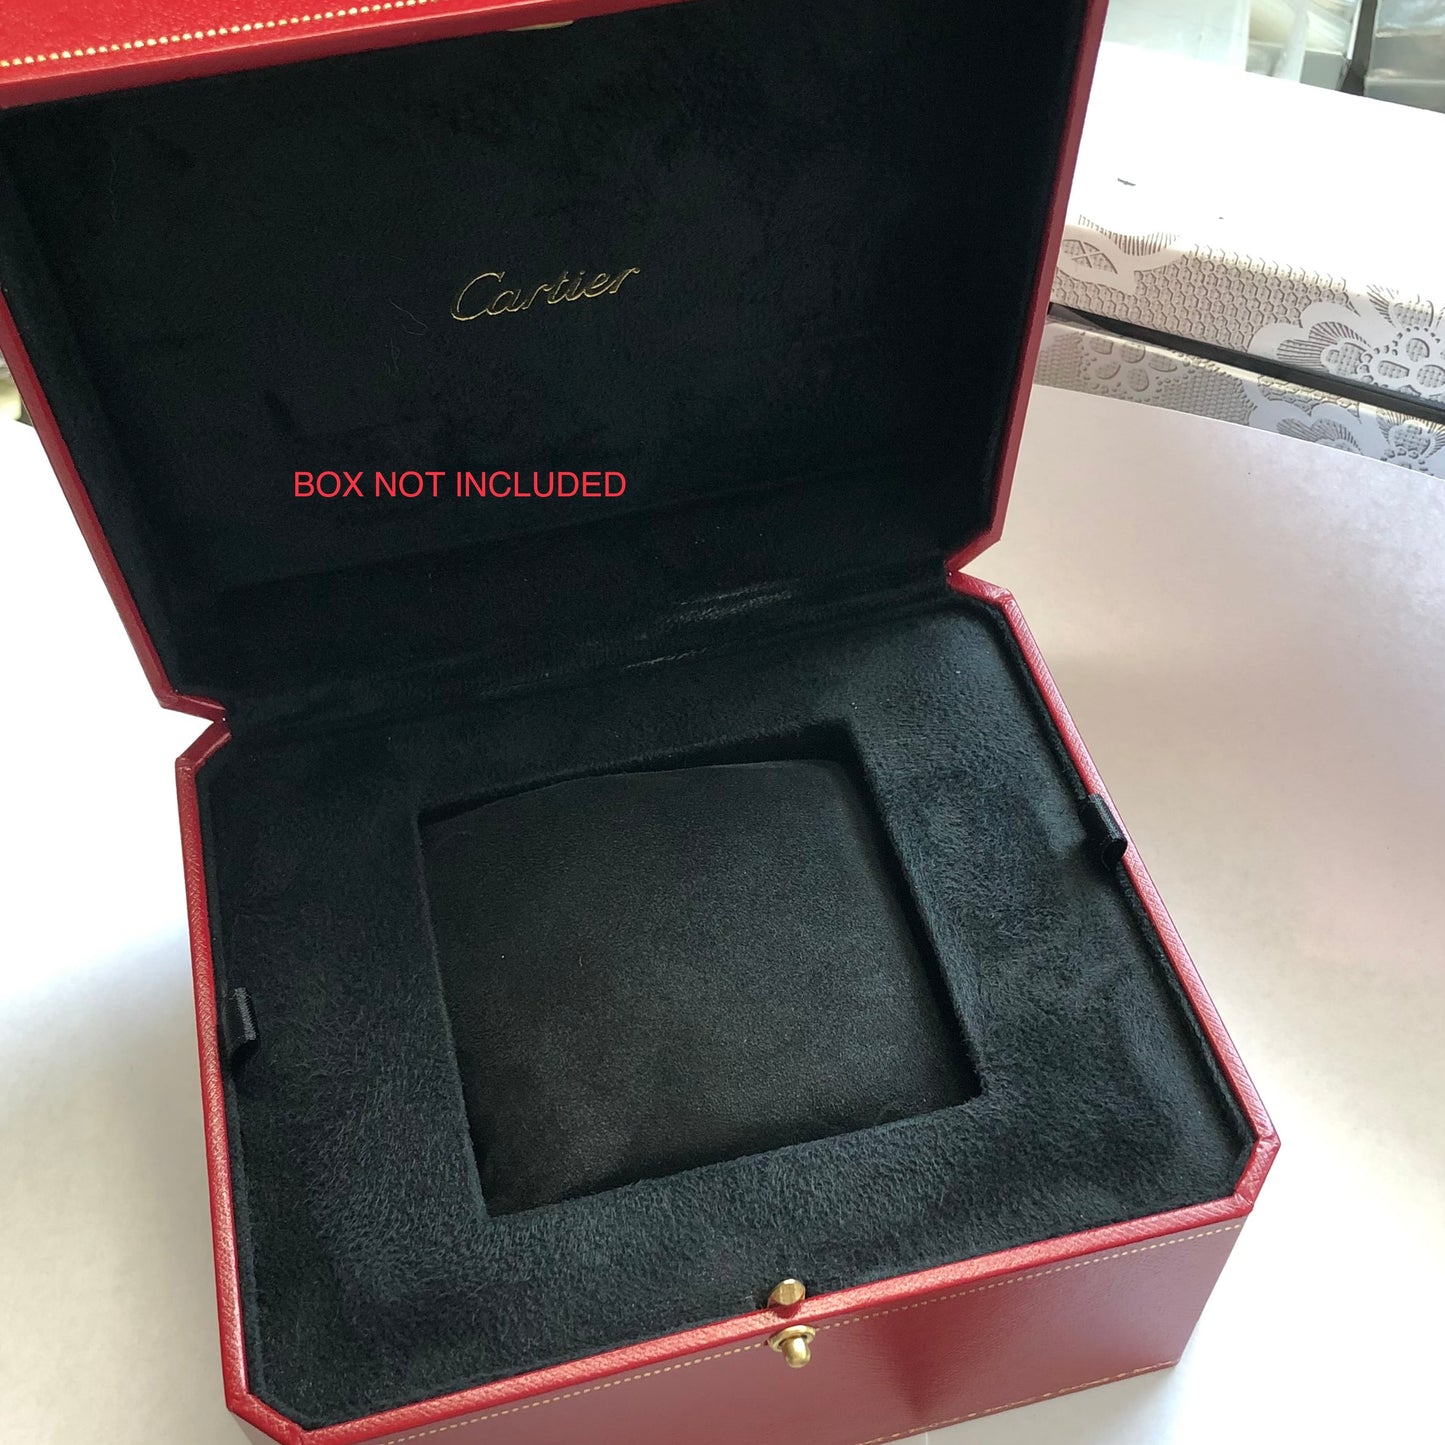 Black Suede Genuine Leather PILLOW CUSHION fits CARTIER Box